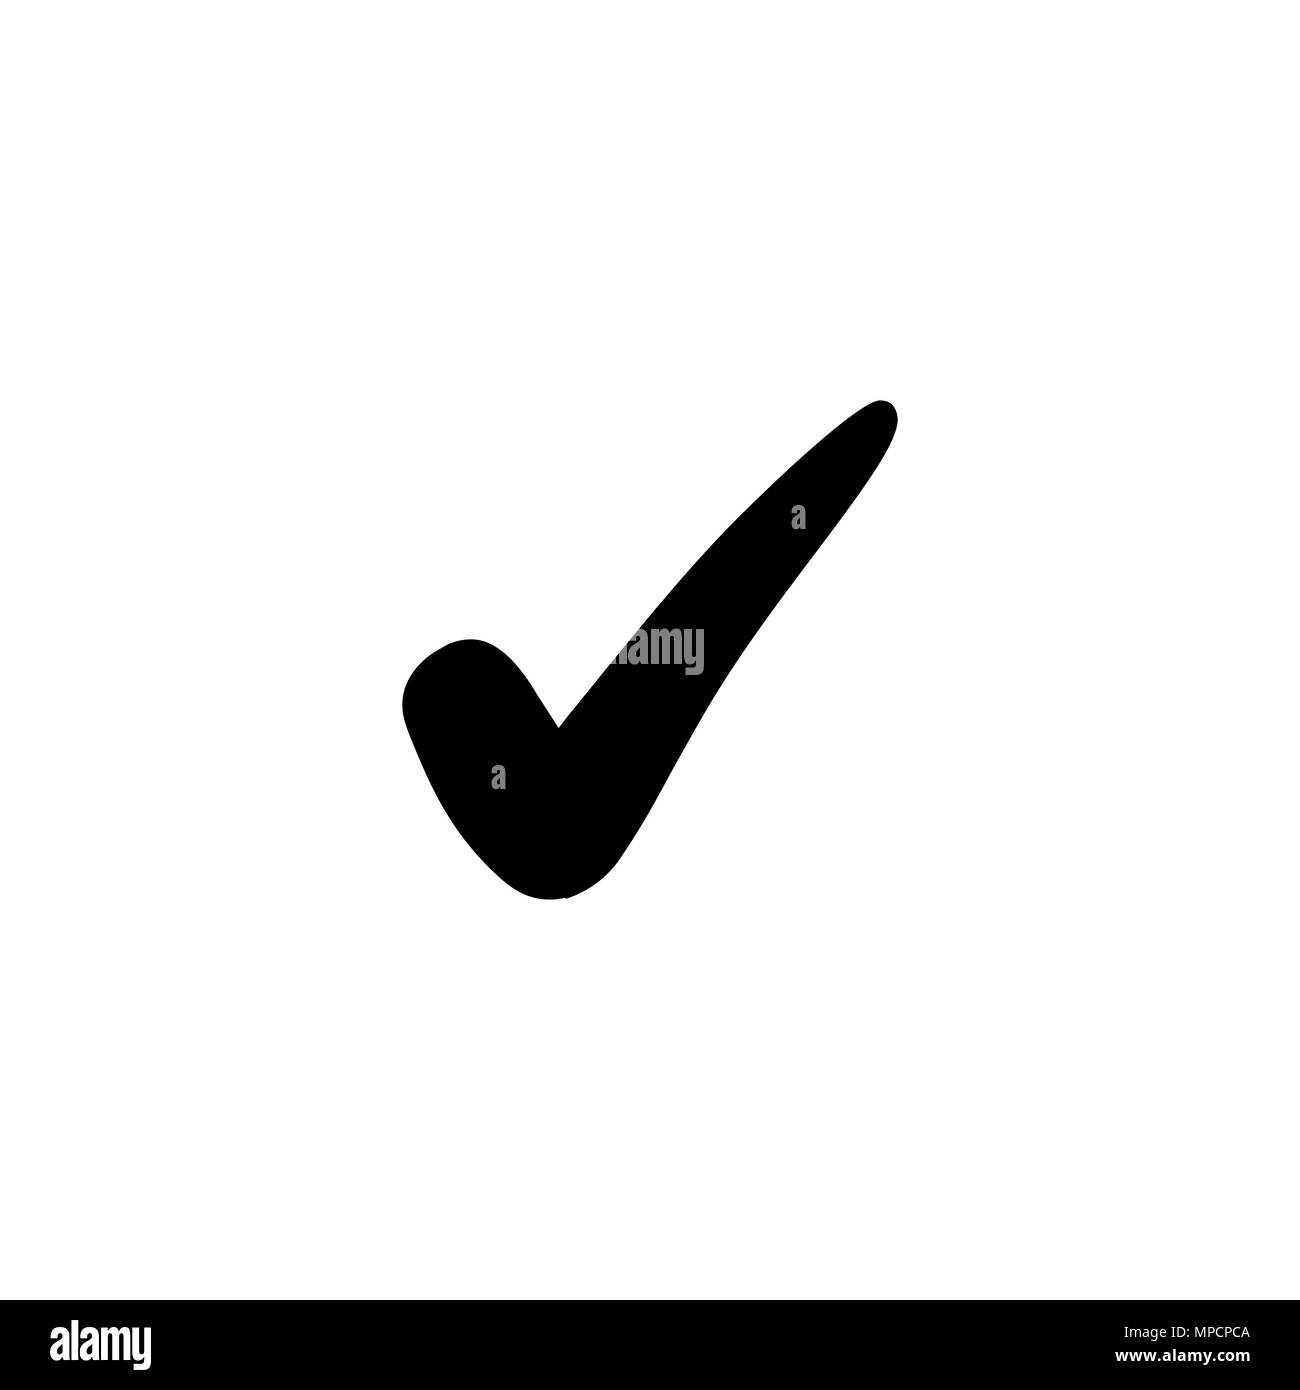 Check Icon in flat style. Perfect black pictogram. Stock Vector